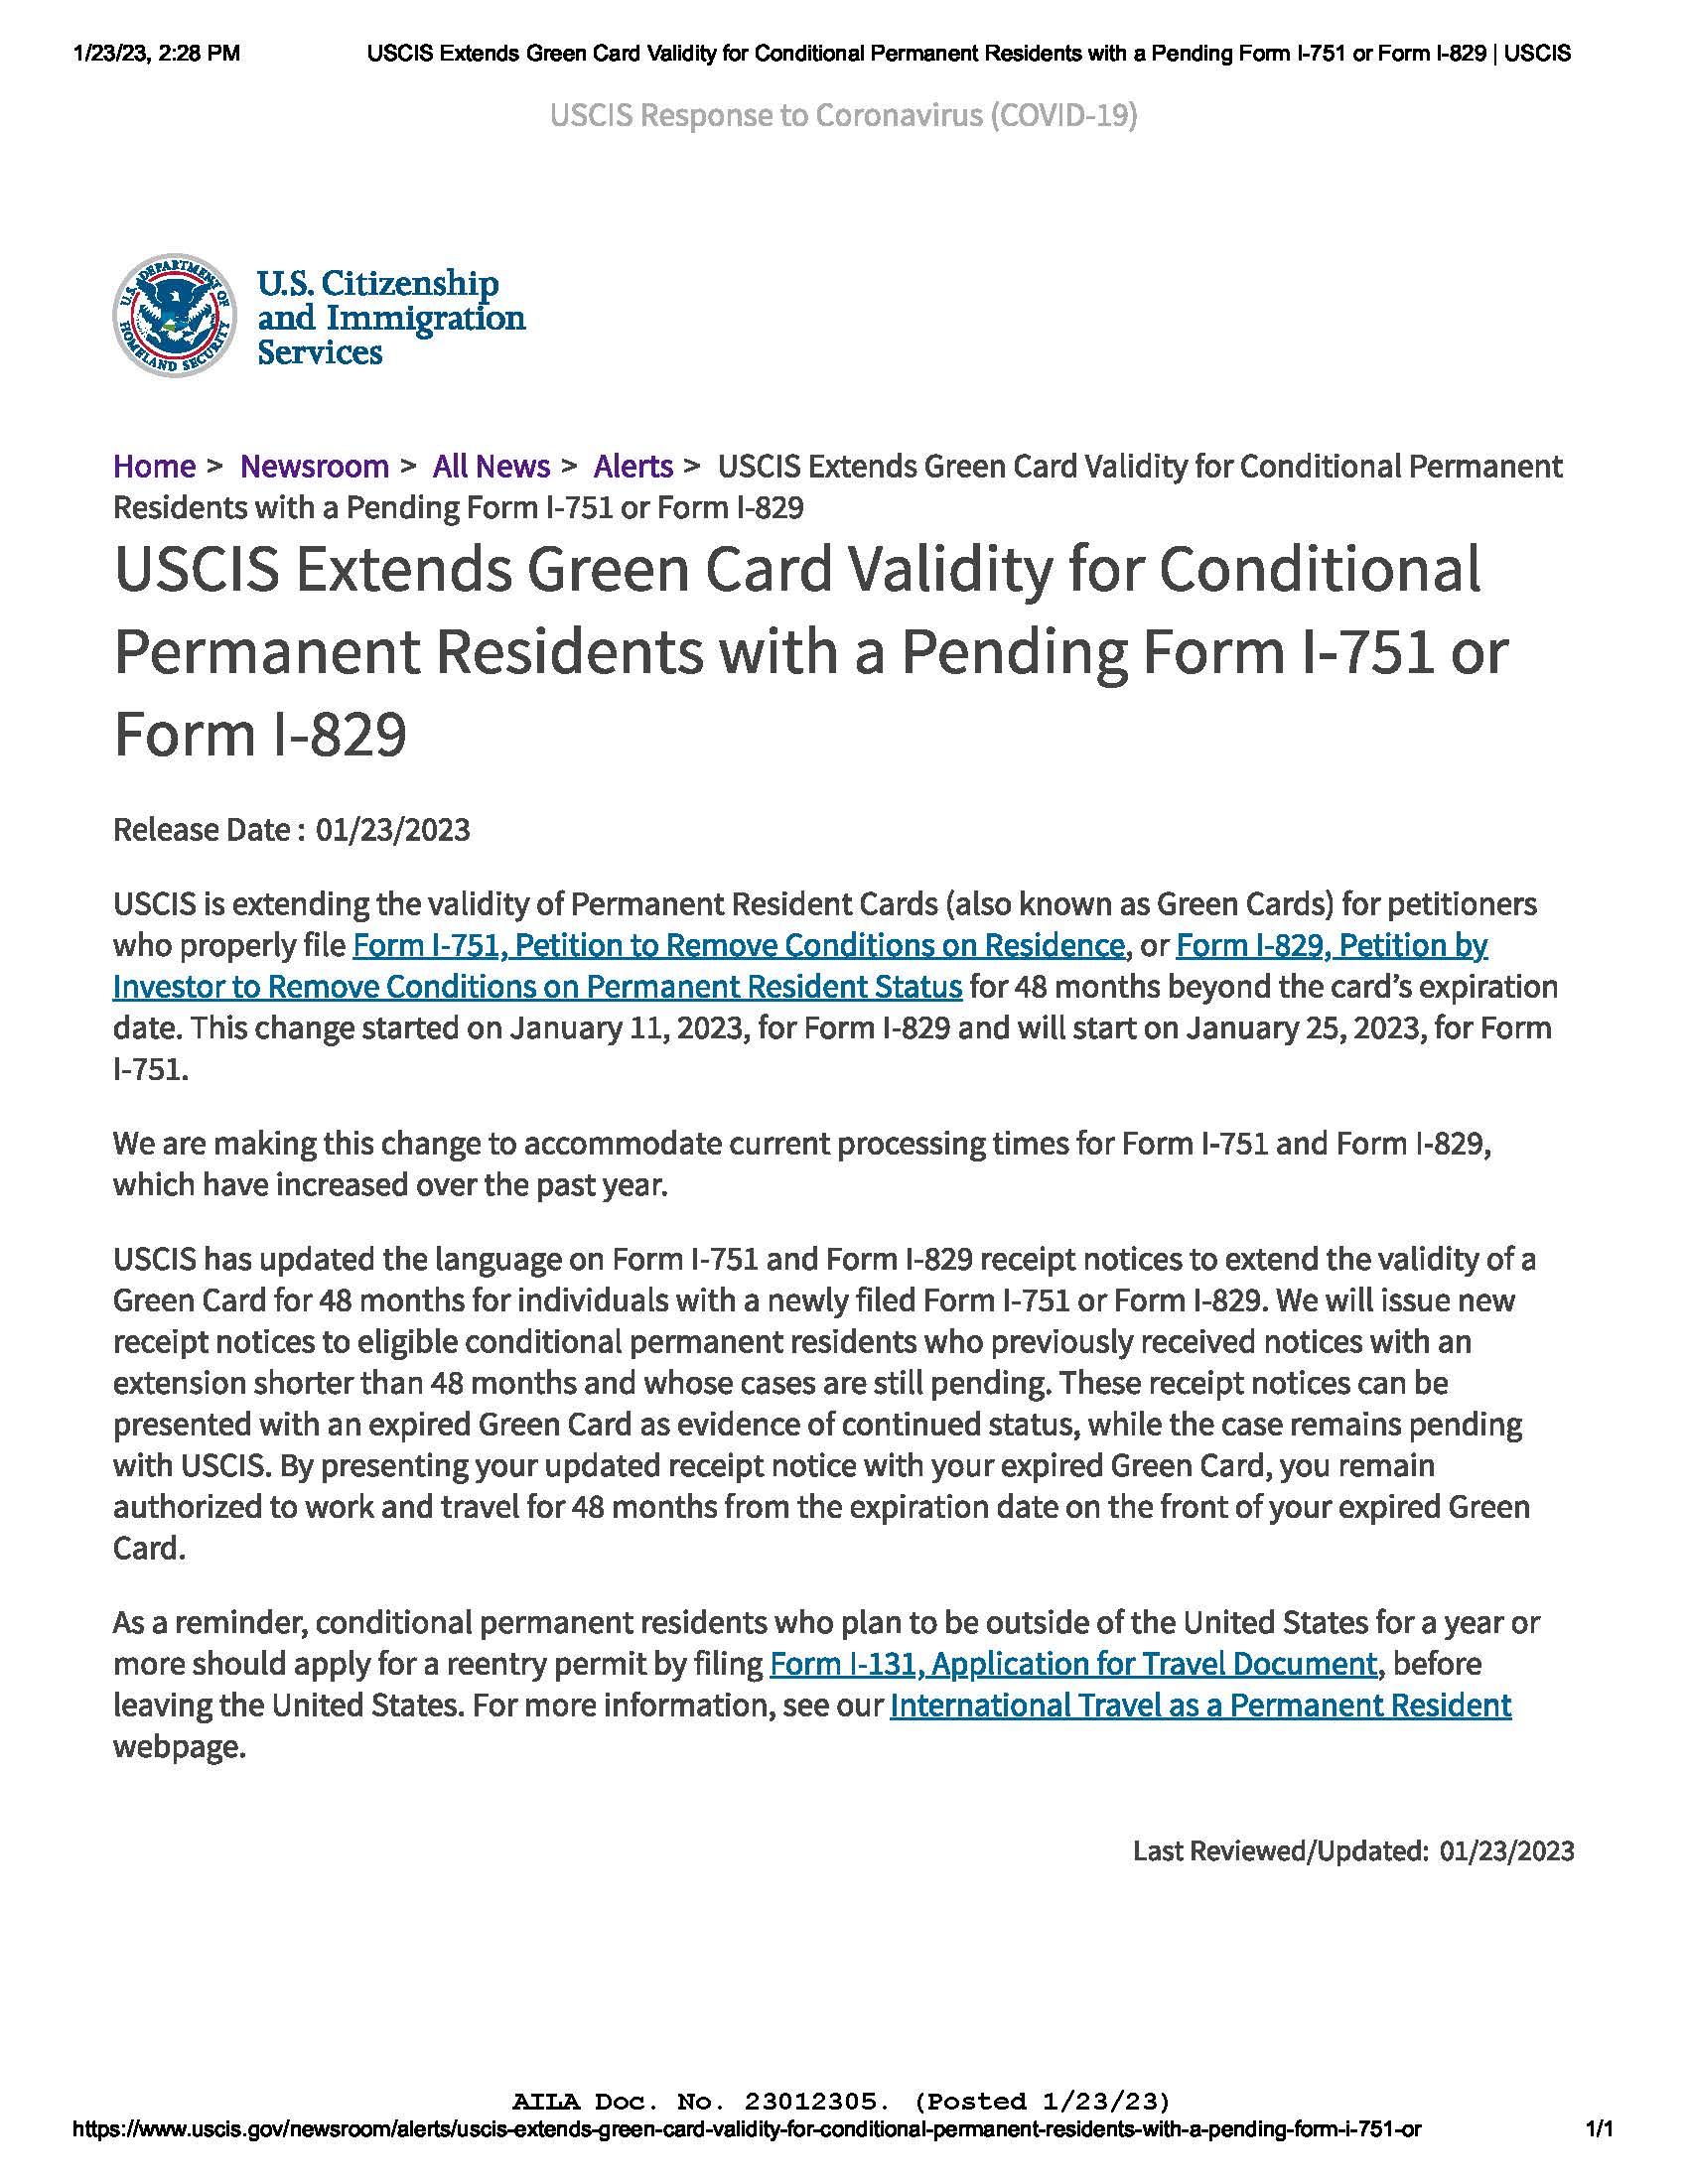 Uscis Extends The Validity Of Expired Green Cards For Certain Conditional Permanent Residents 1057